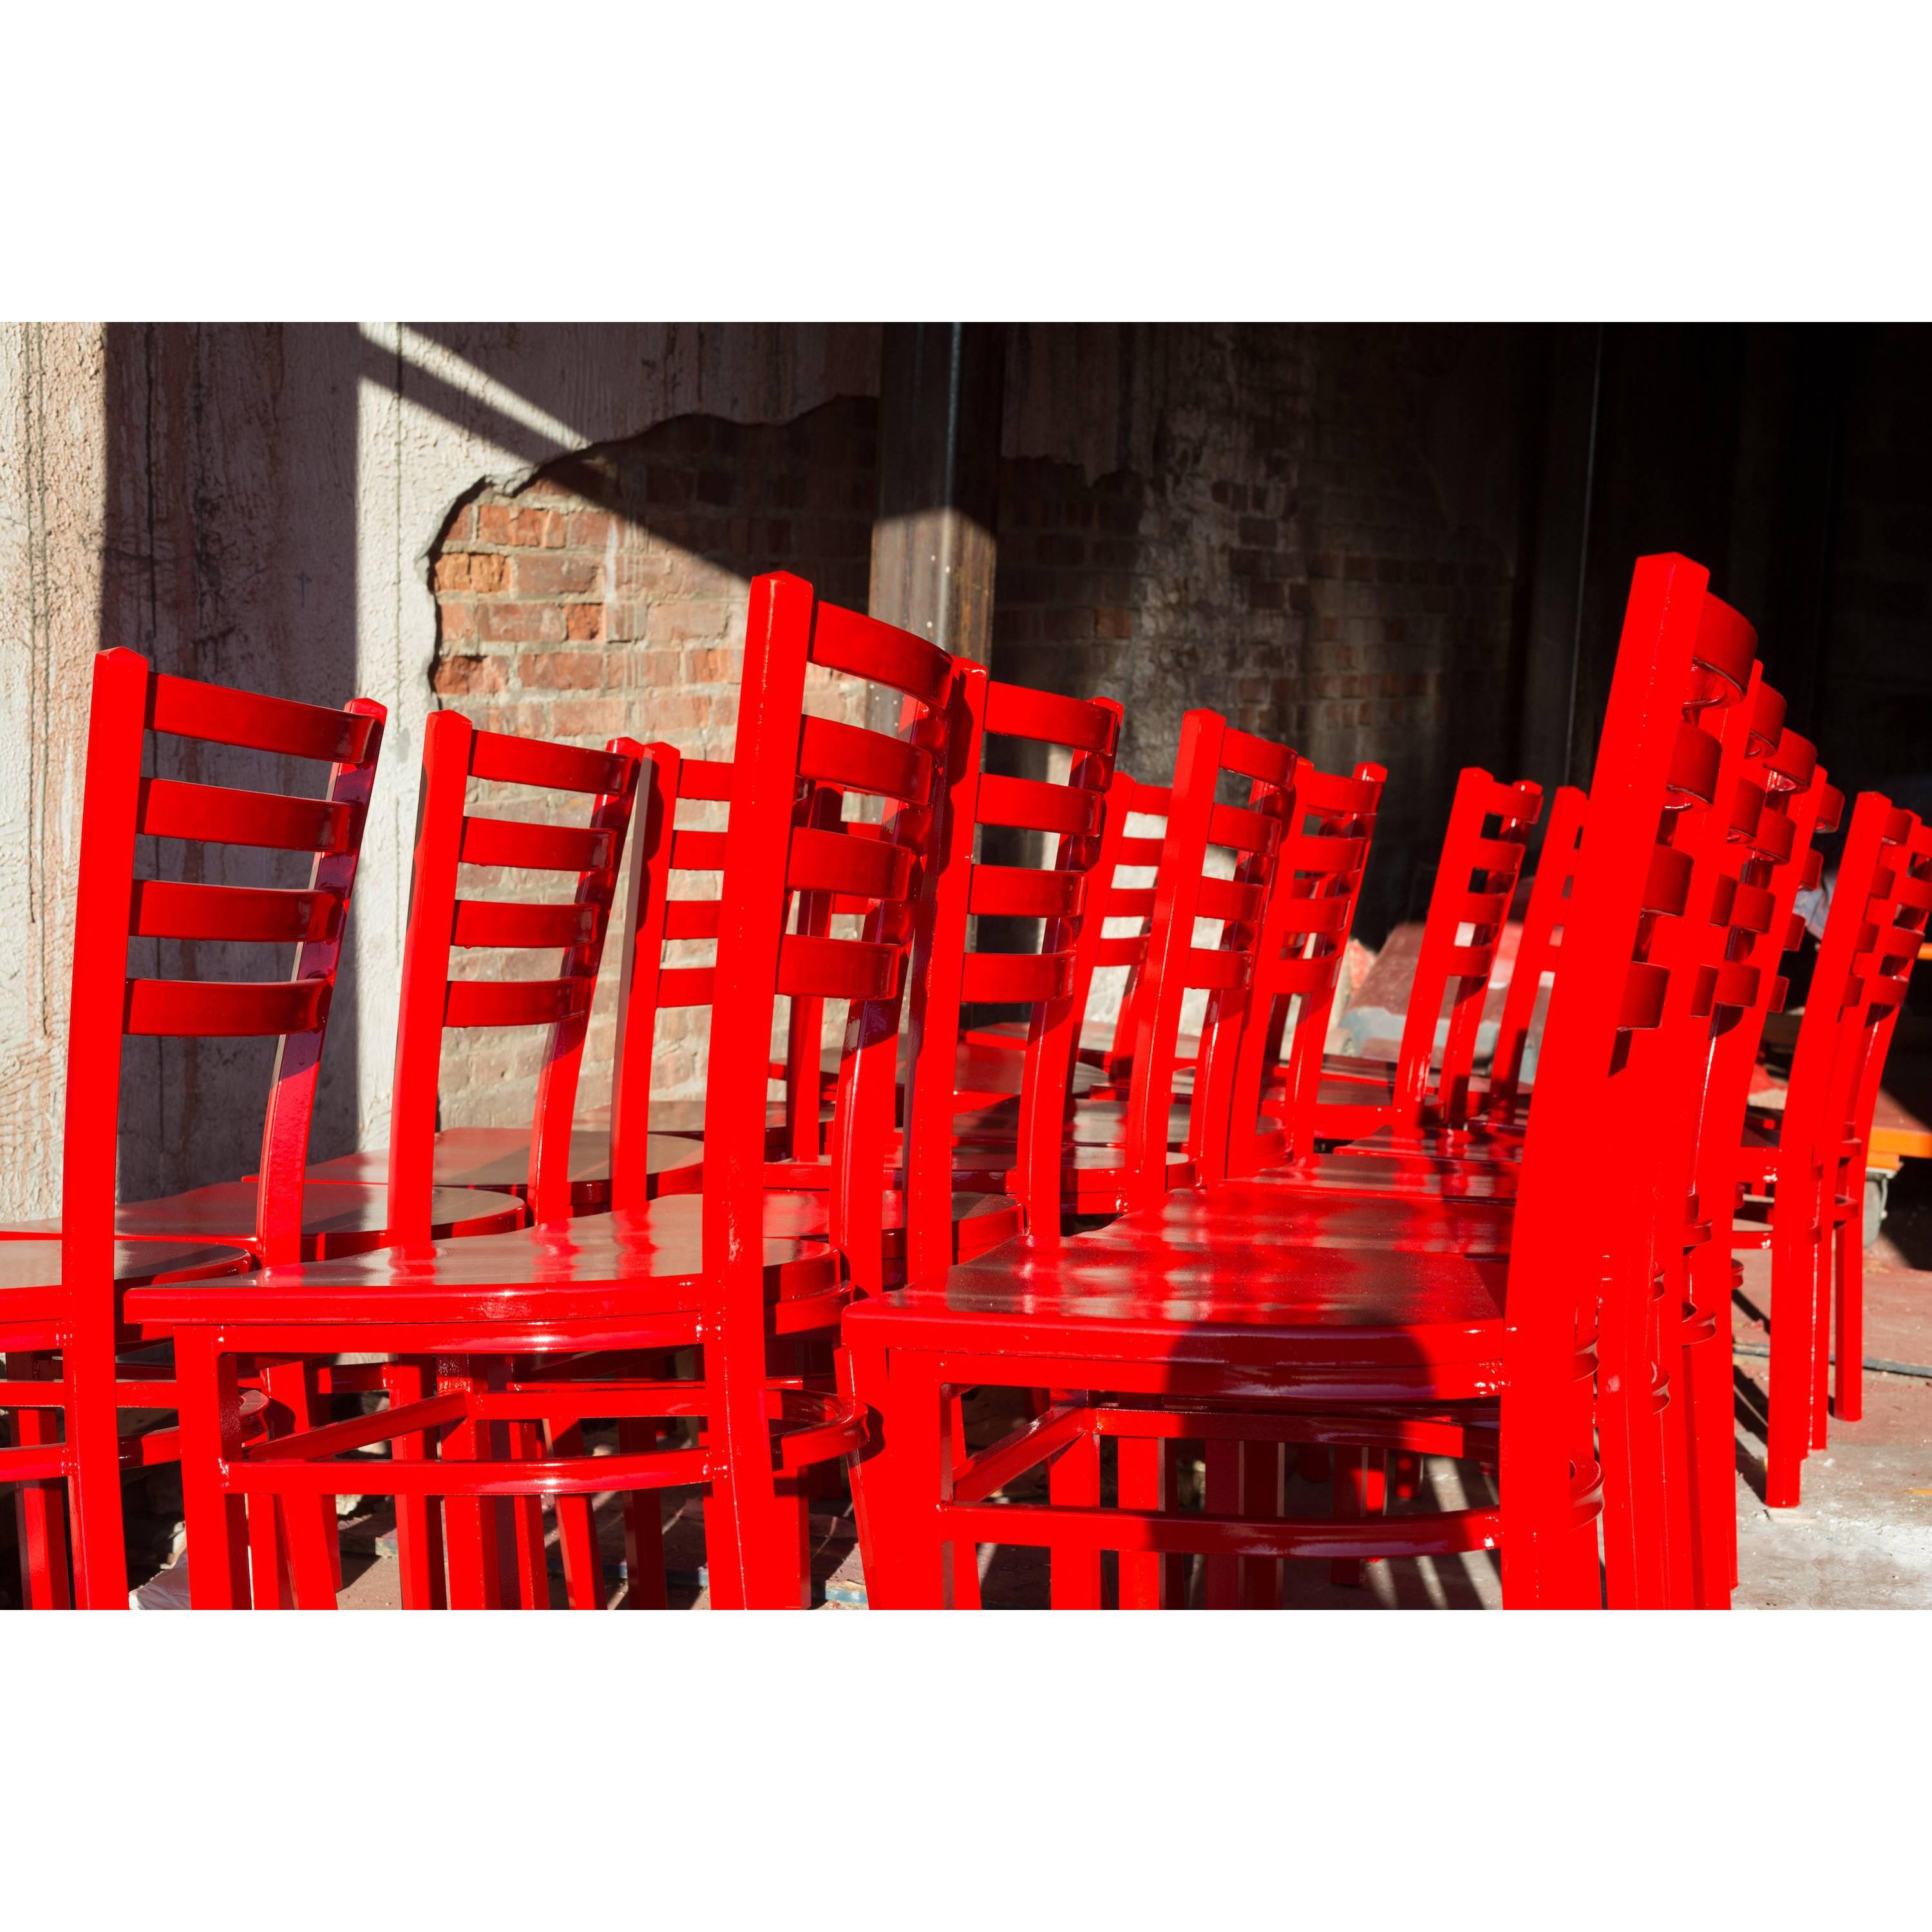 Red Chairs/Photography For Sale